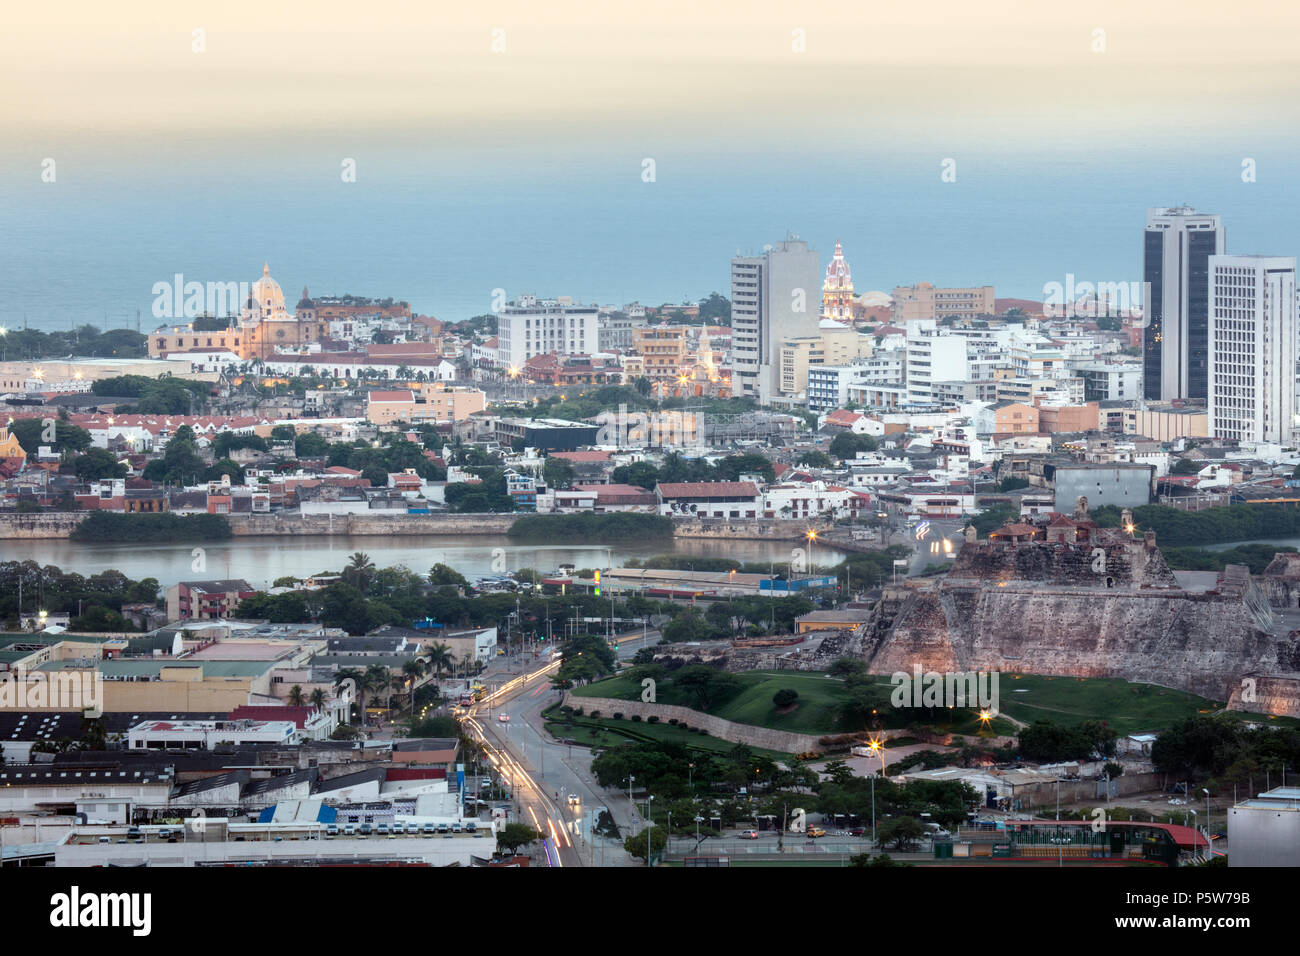 The skyline of the historical Unesco World Heritage listed centre of Cartagena city, on the Caribbean coast of Colombia, South America Stock Photo